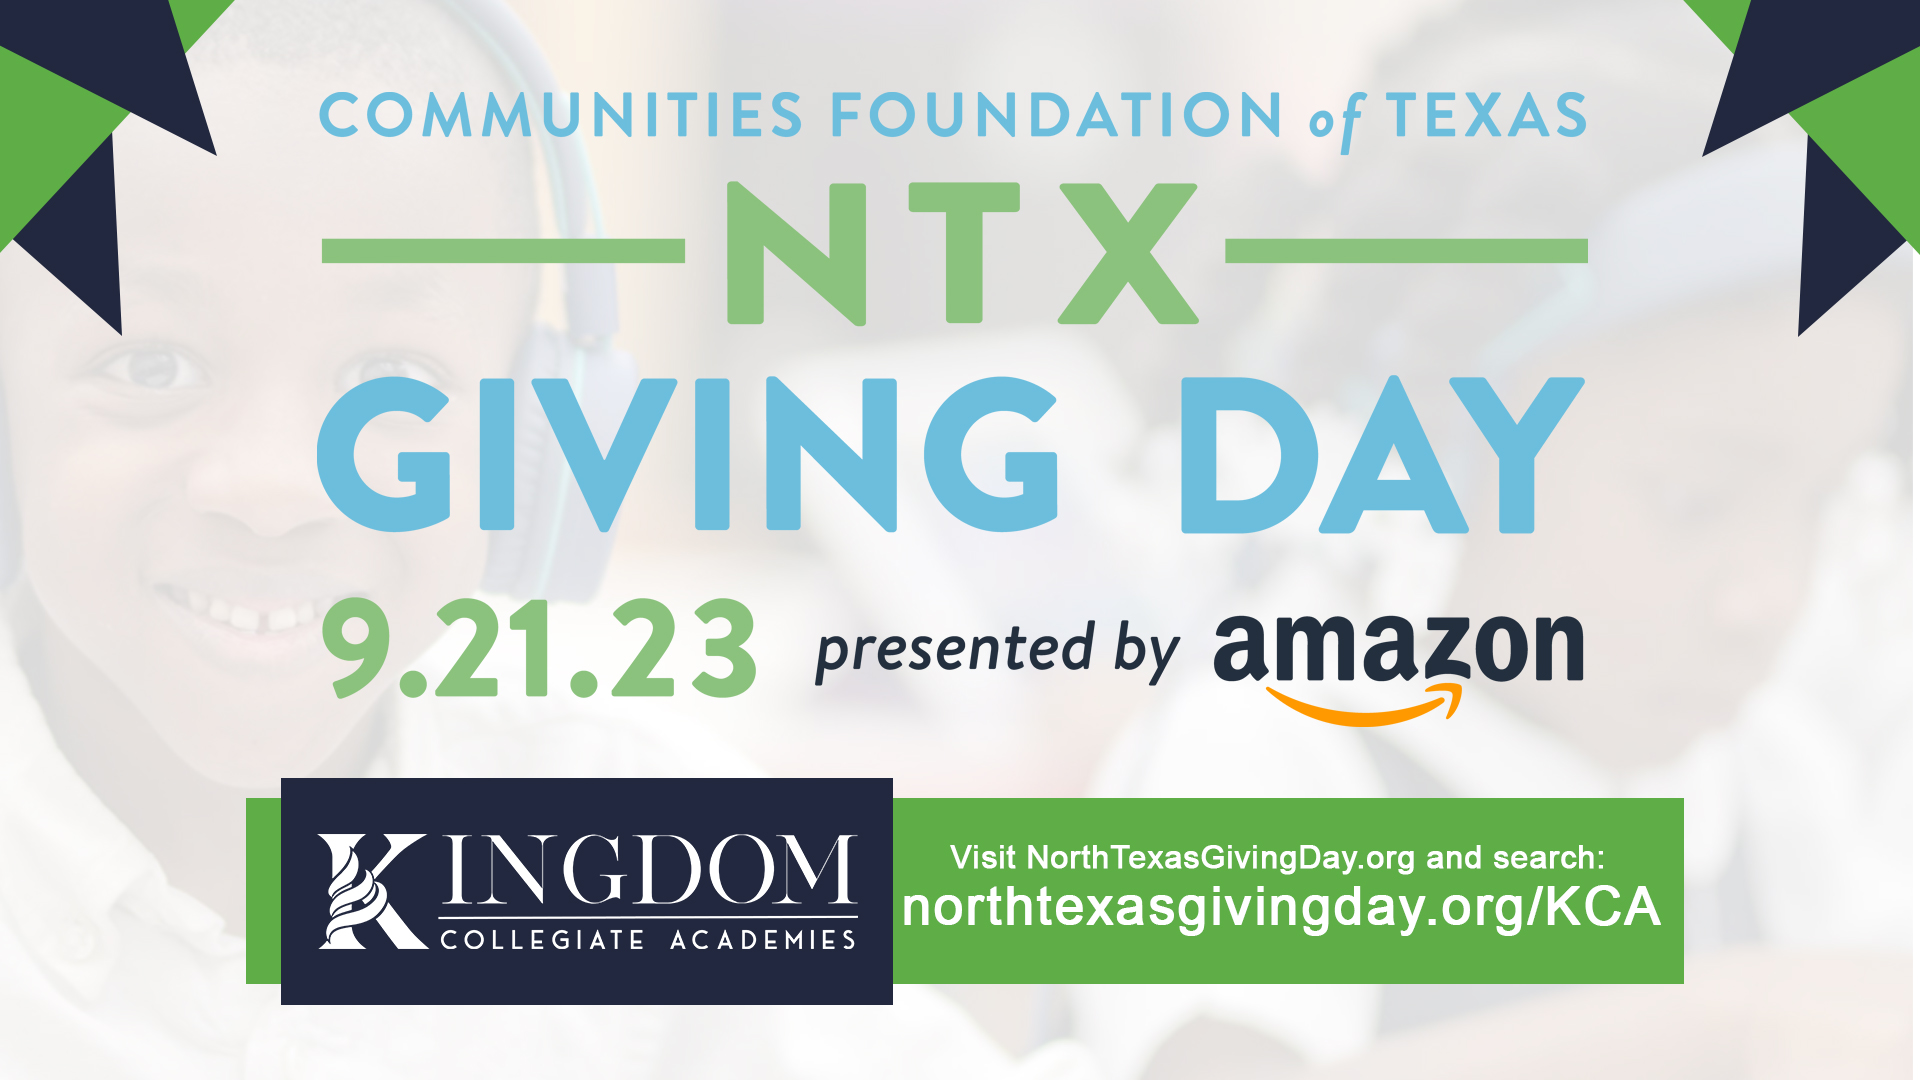 North Texas Giving Day Support KCA Kingdom Collegiate Academies